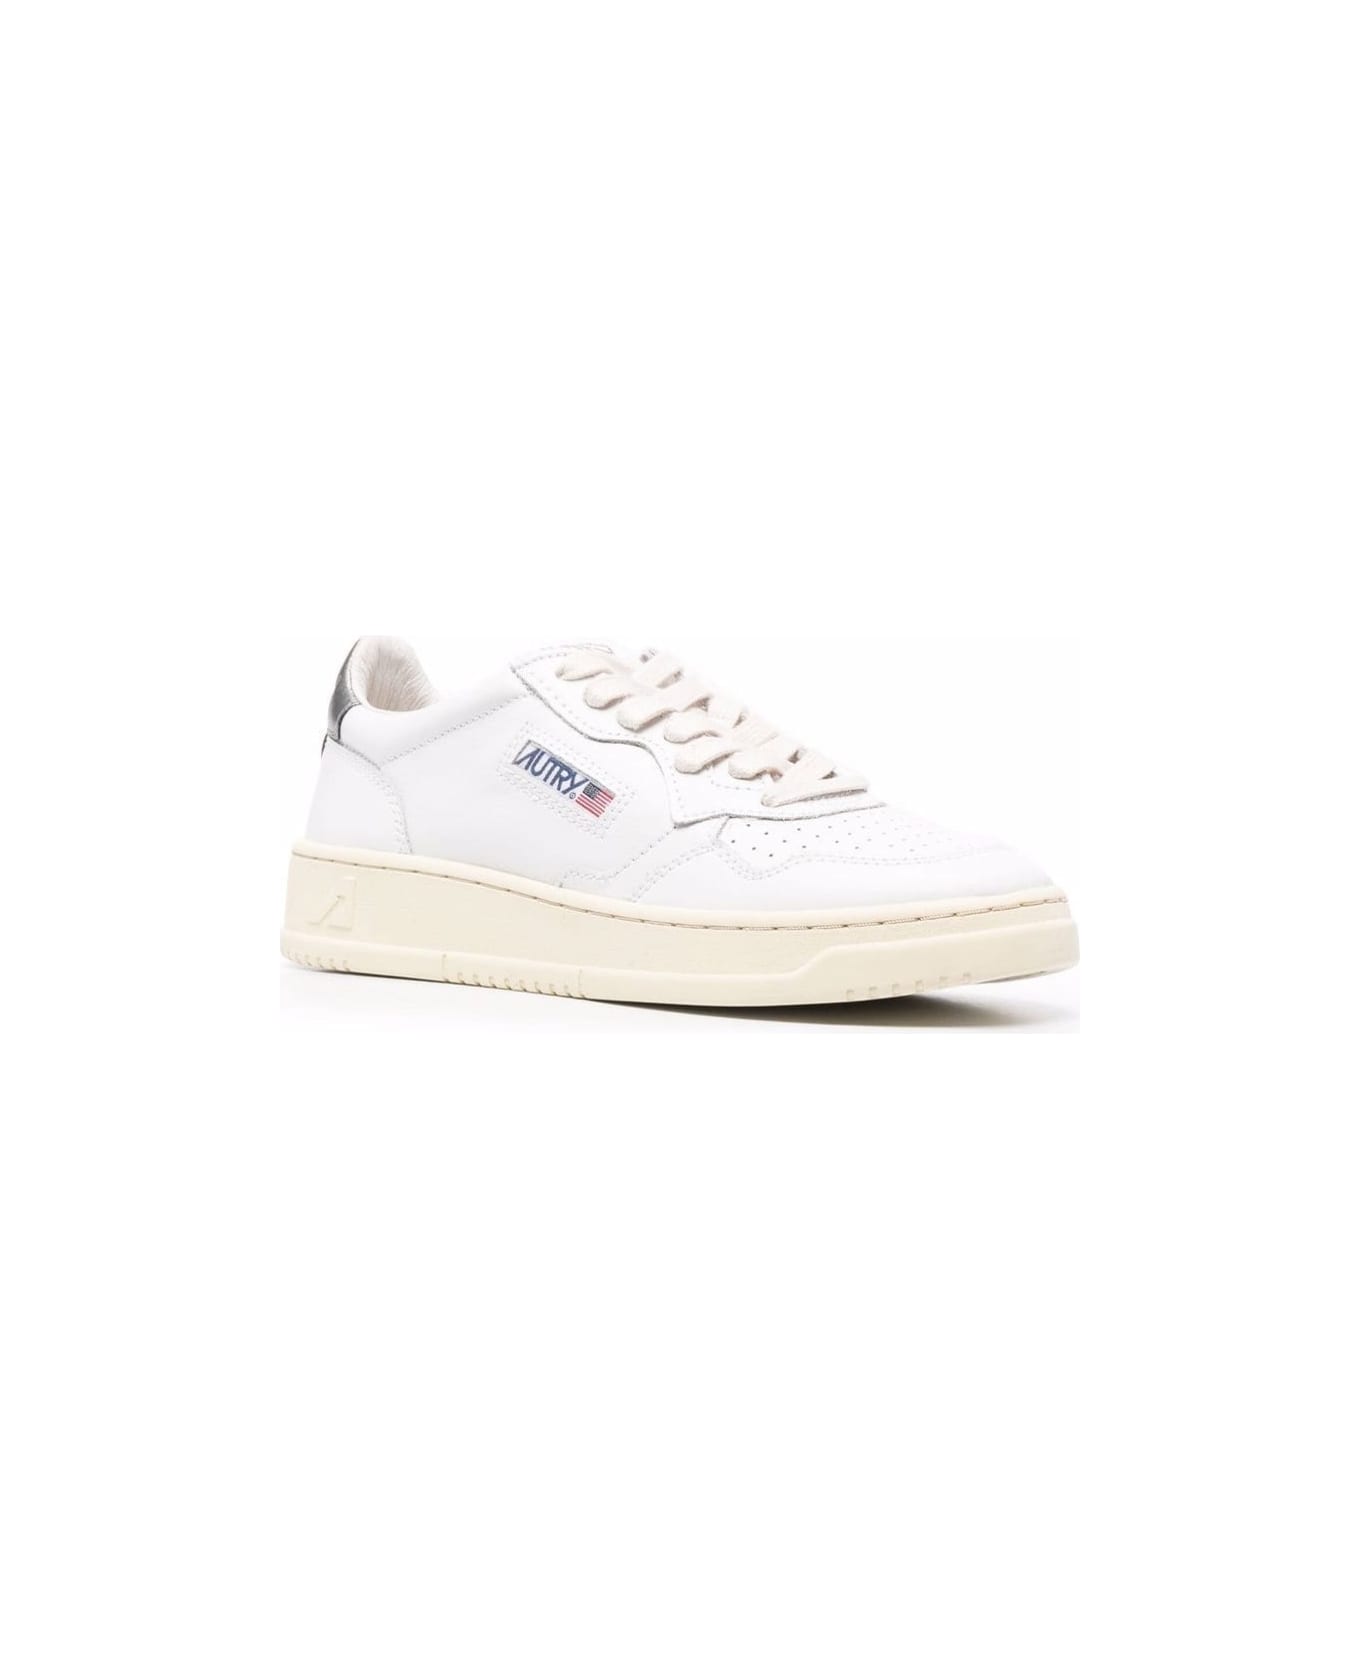 Autry White And Silver Leather Sneakers Autry Woman - Bianco/Argento スニーカー